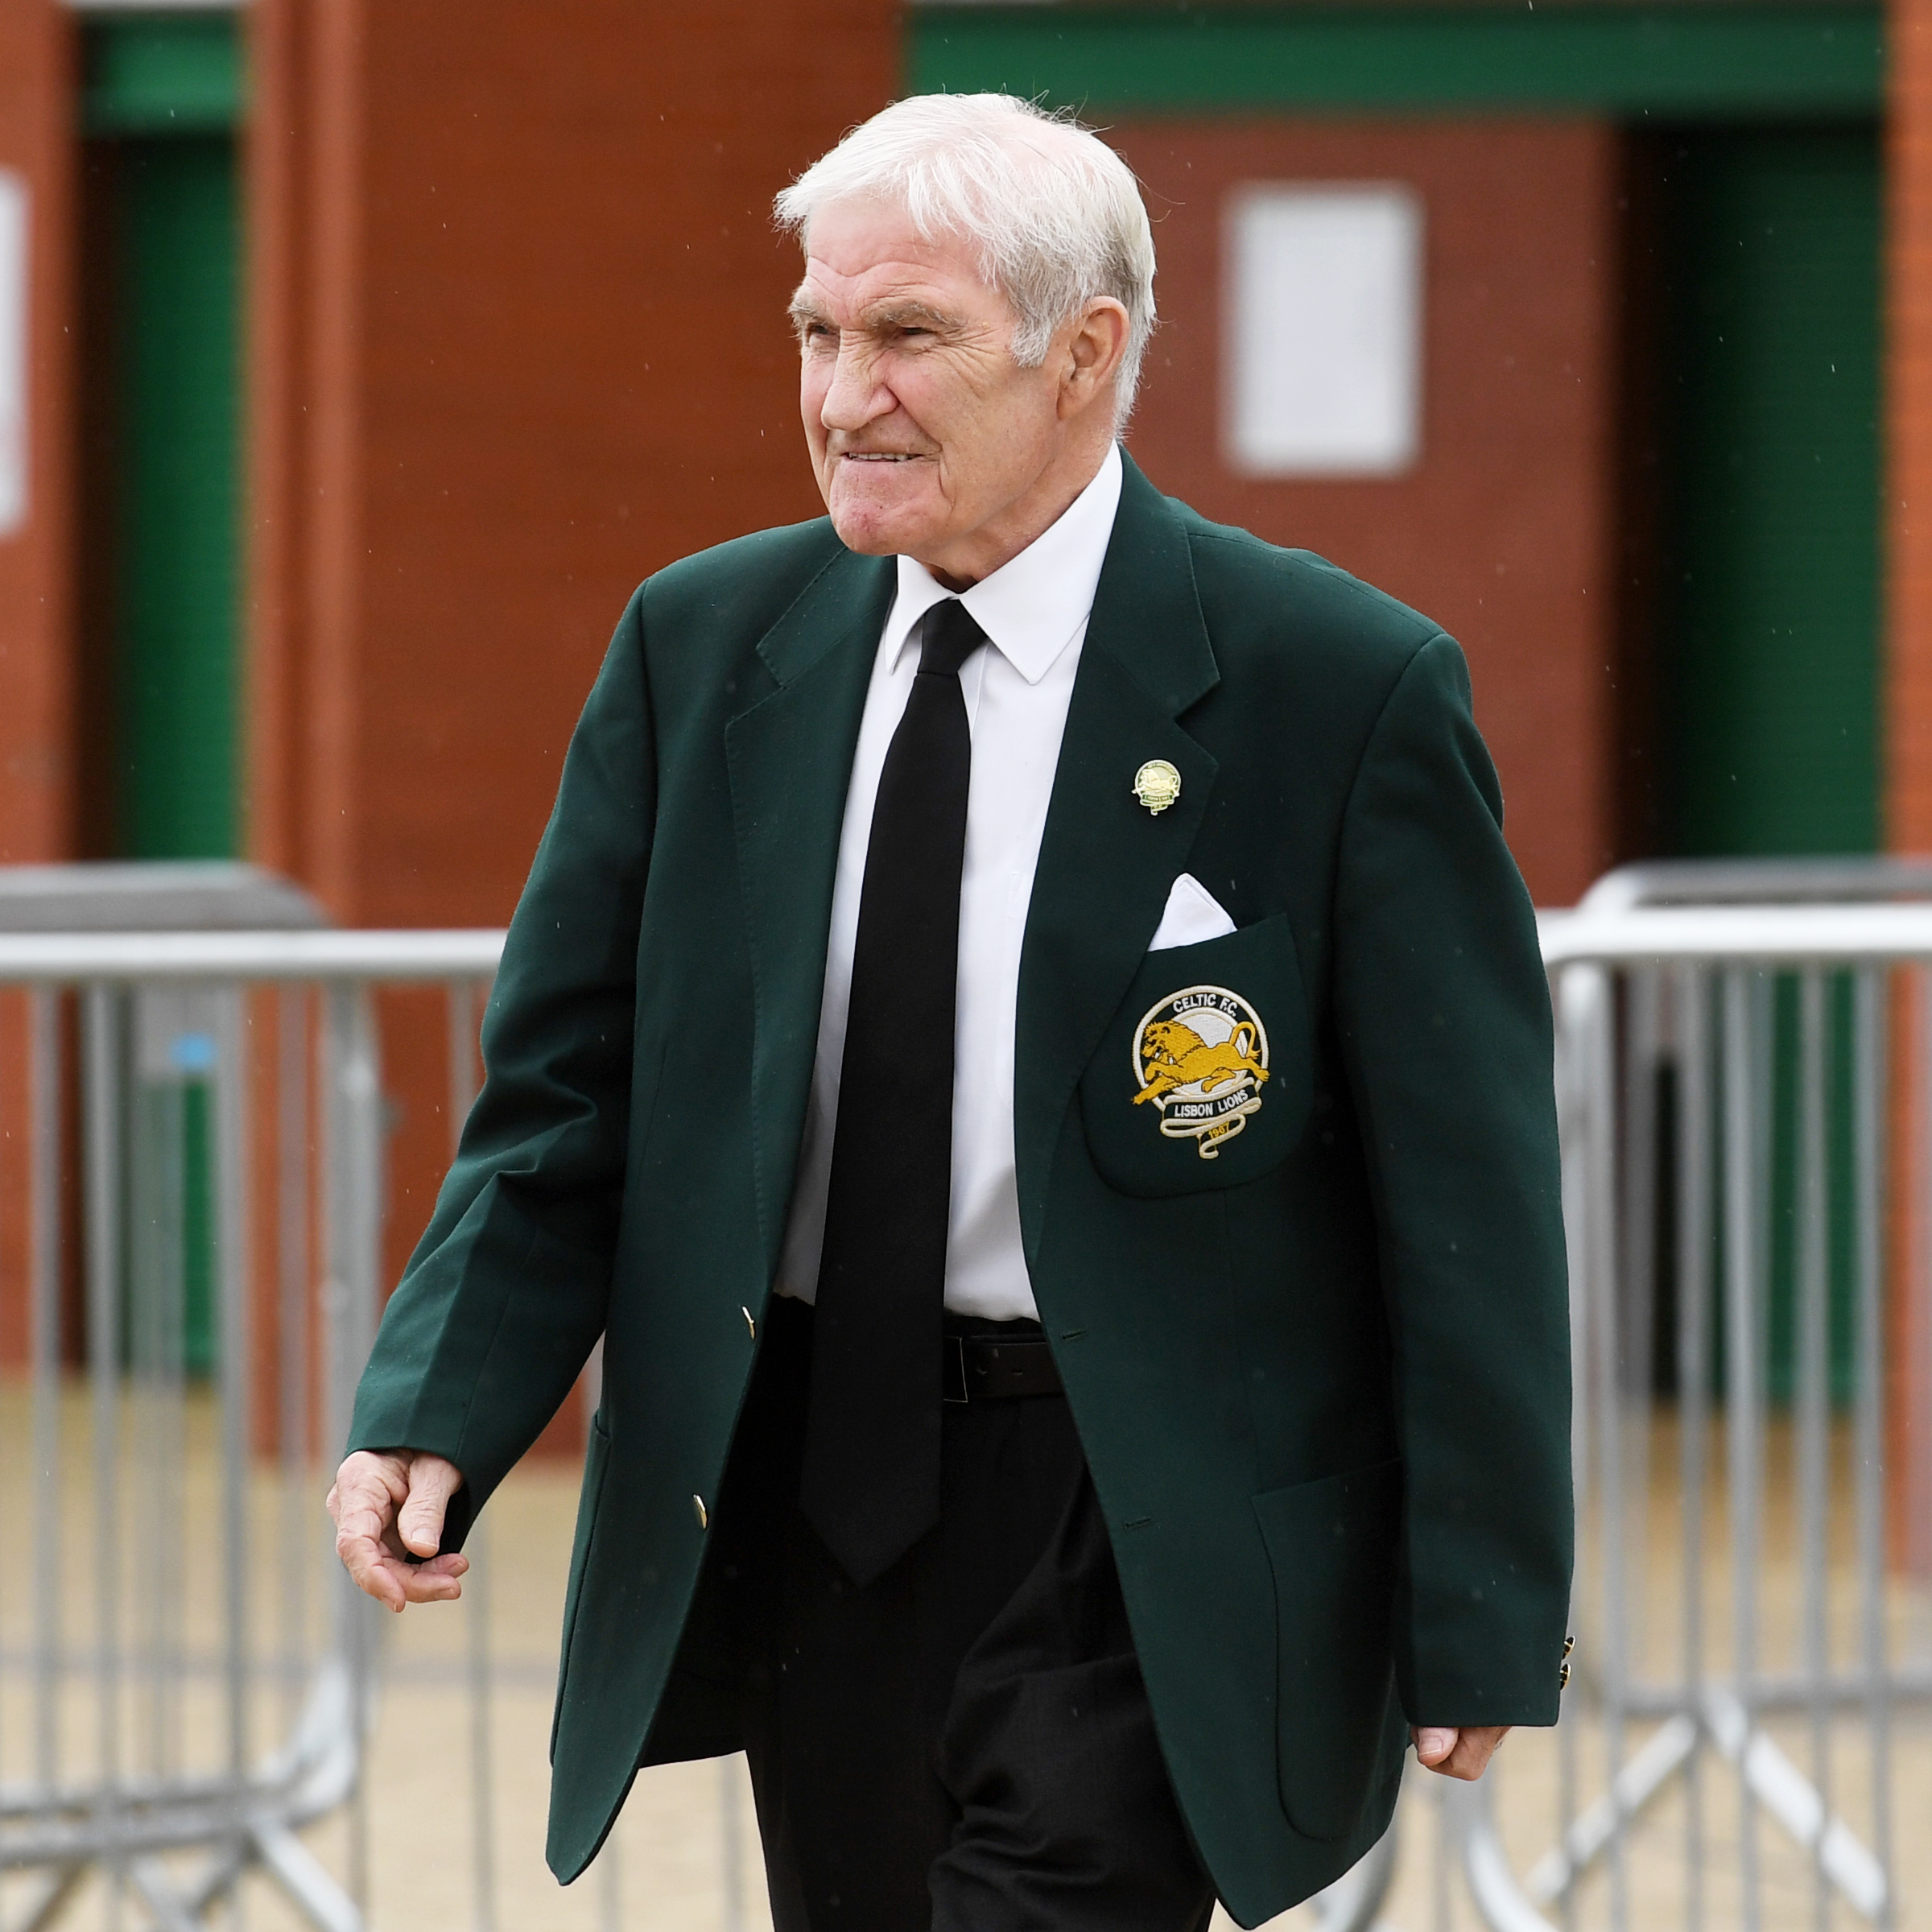 08/05/19.CELTIC PARK - GLASGOW.Lisbon Lion Bertie Auld is pictured at Celtic Park prior to the funeral of legendary European Cup winner Stevie Chalmers